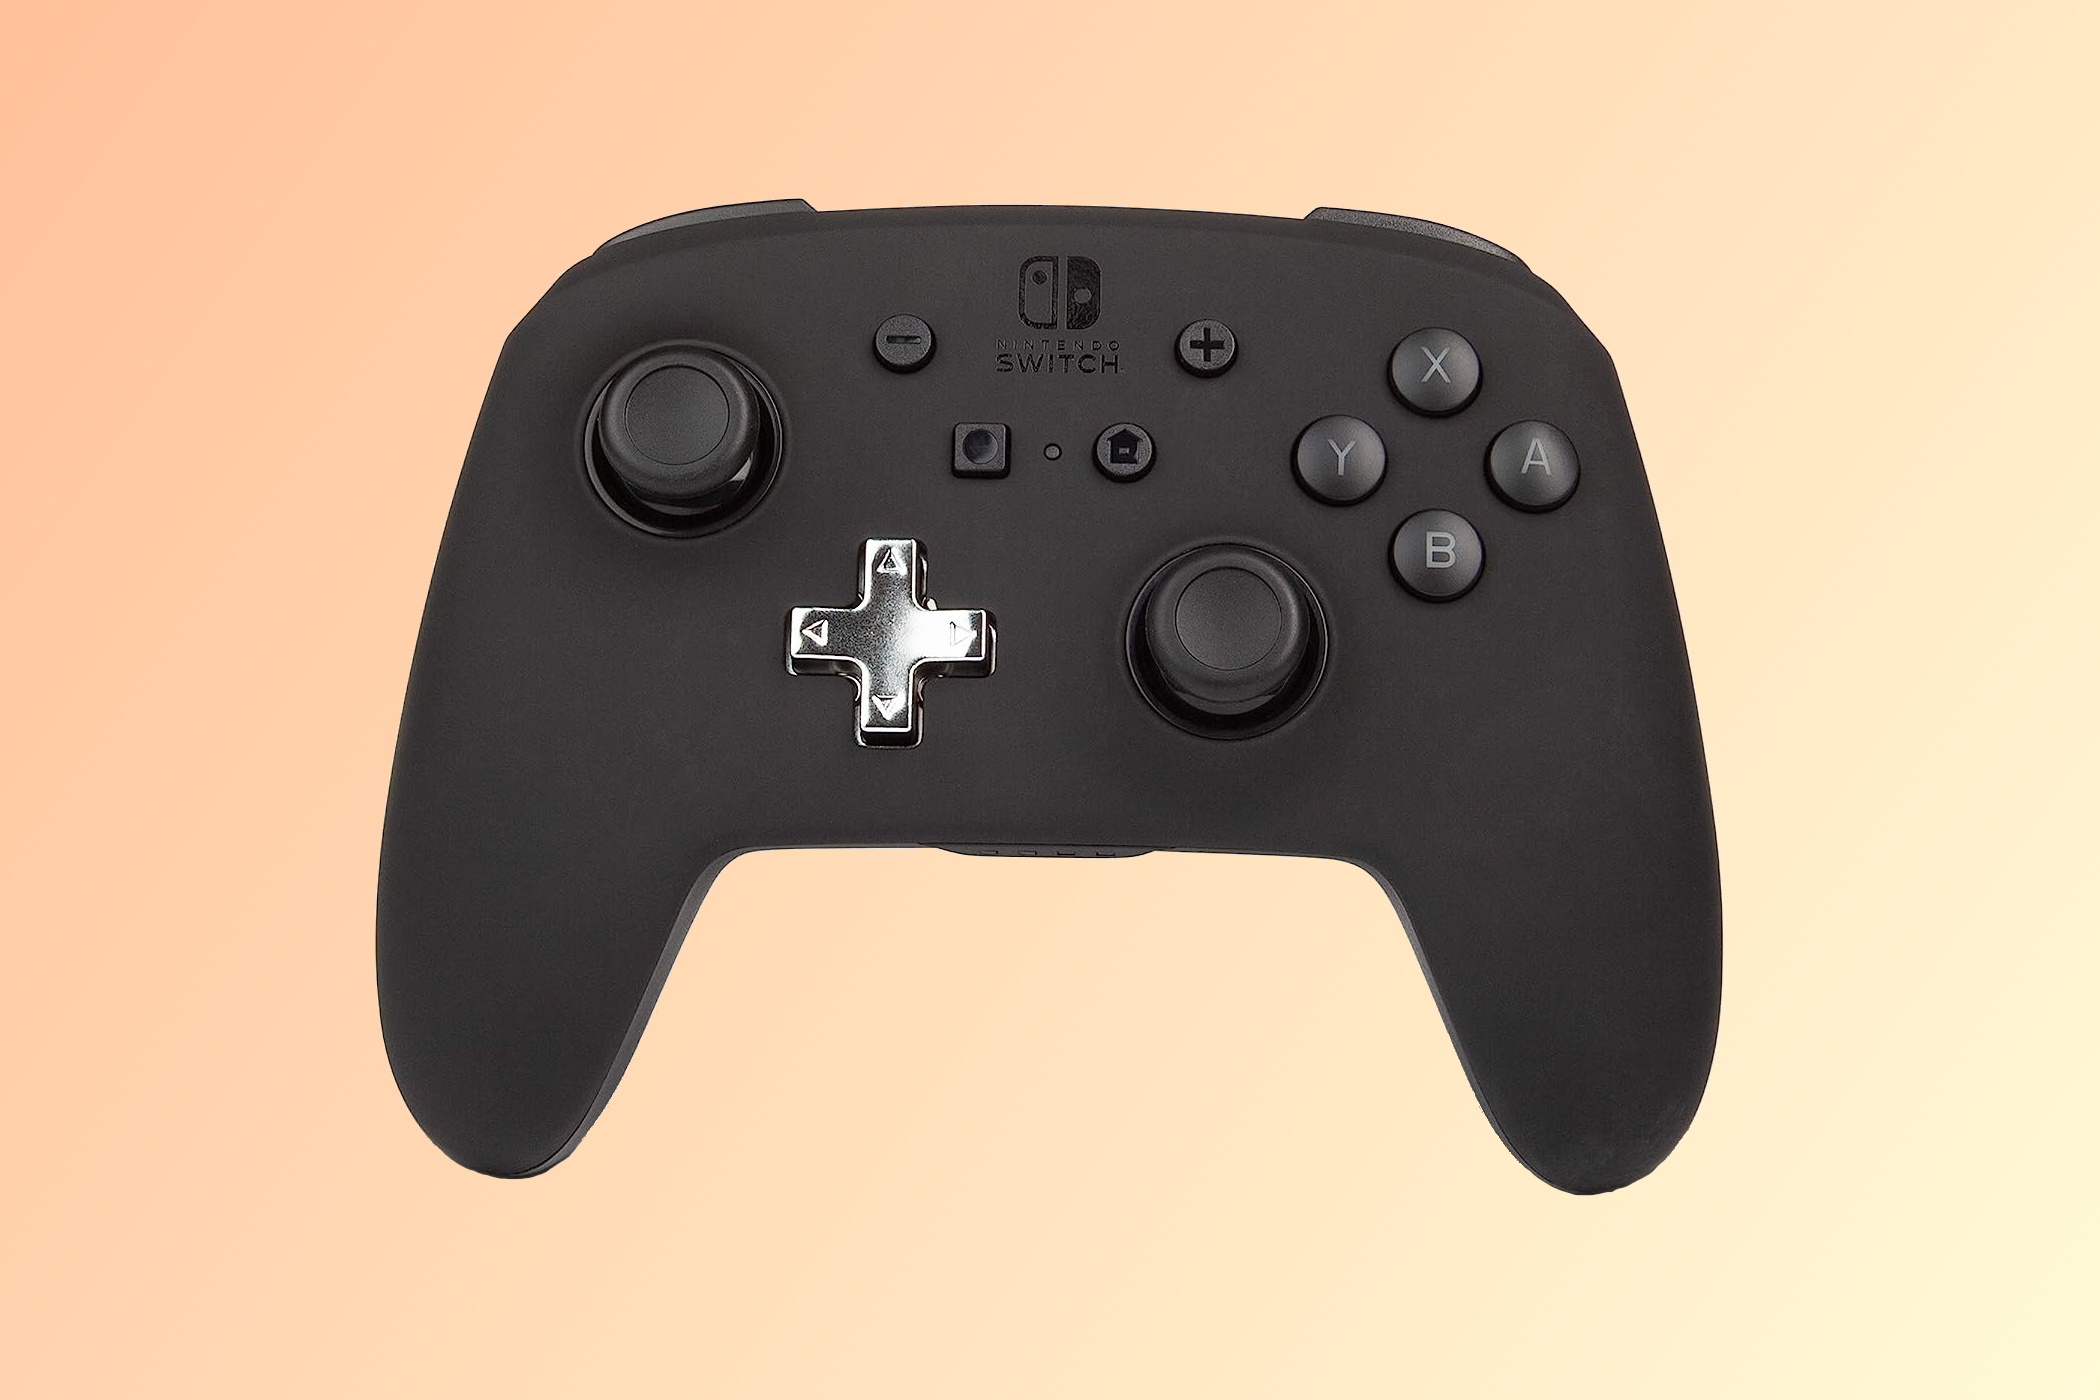 Nintendo Switch Pro Controller on sale: Save $20 at